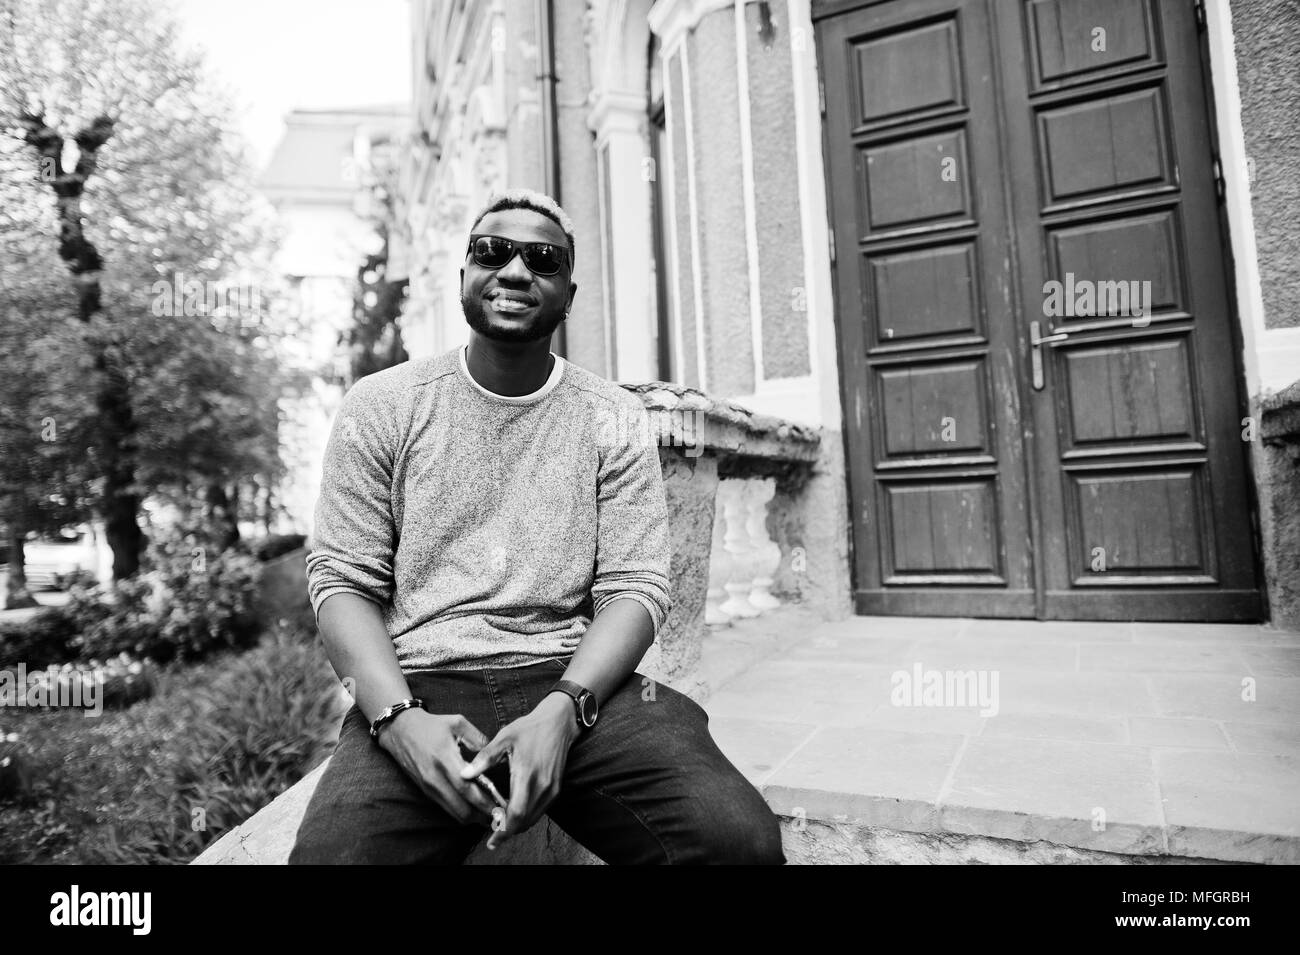 Stylish african american boy on gray sweater and black sunglasses posed on street. Fashionable black guy. Stock Photo